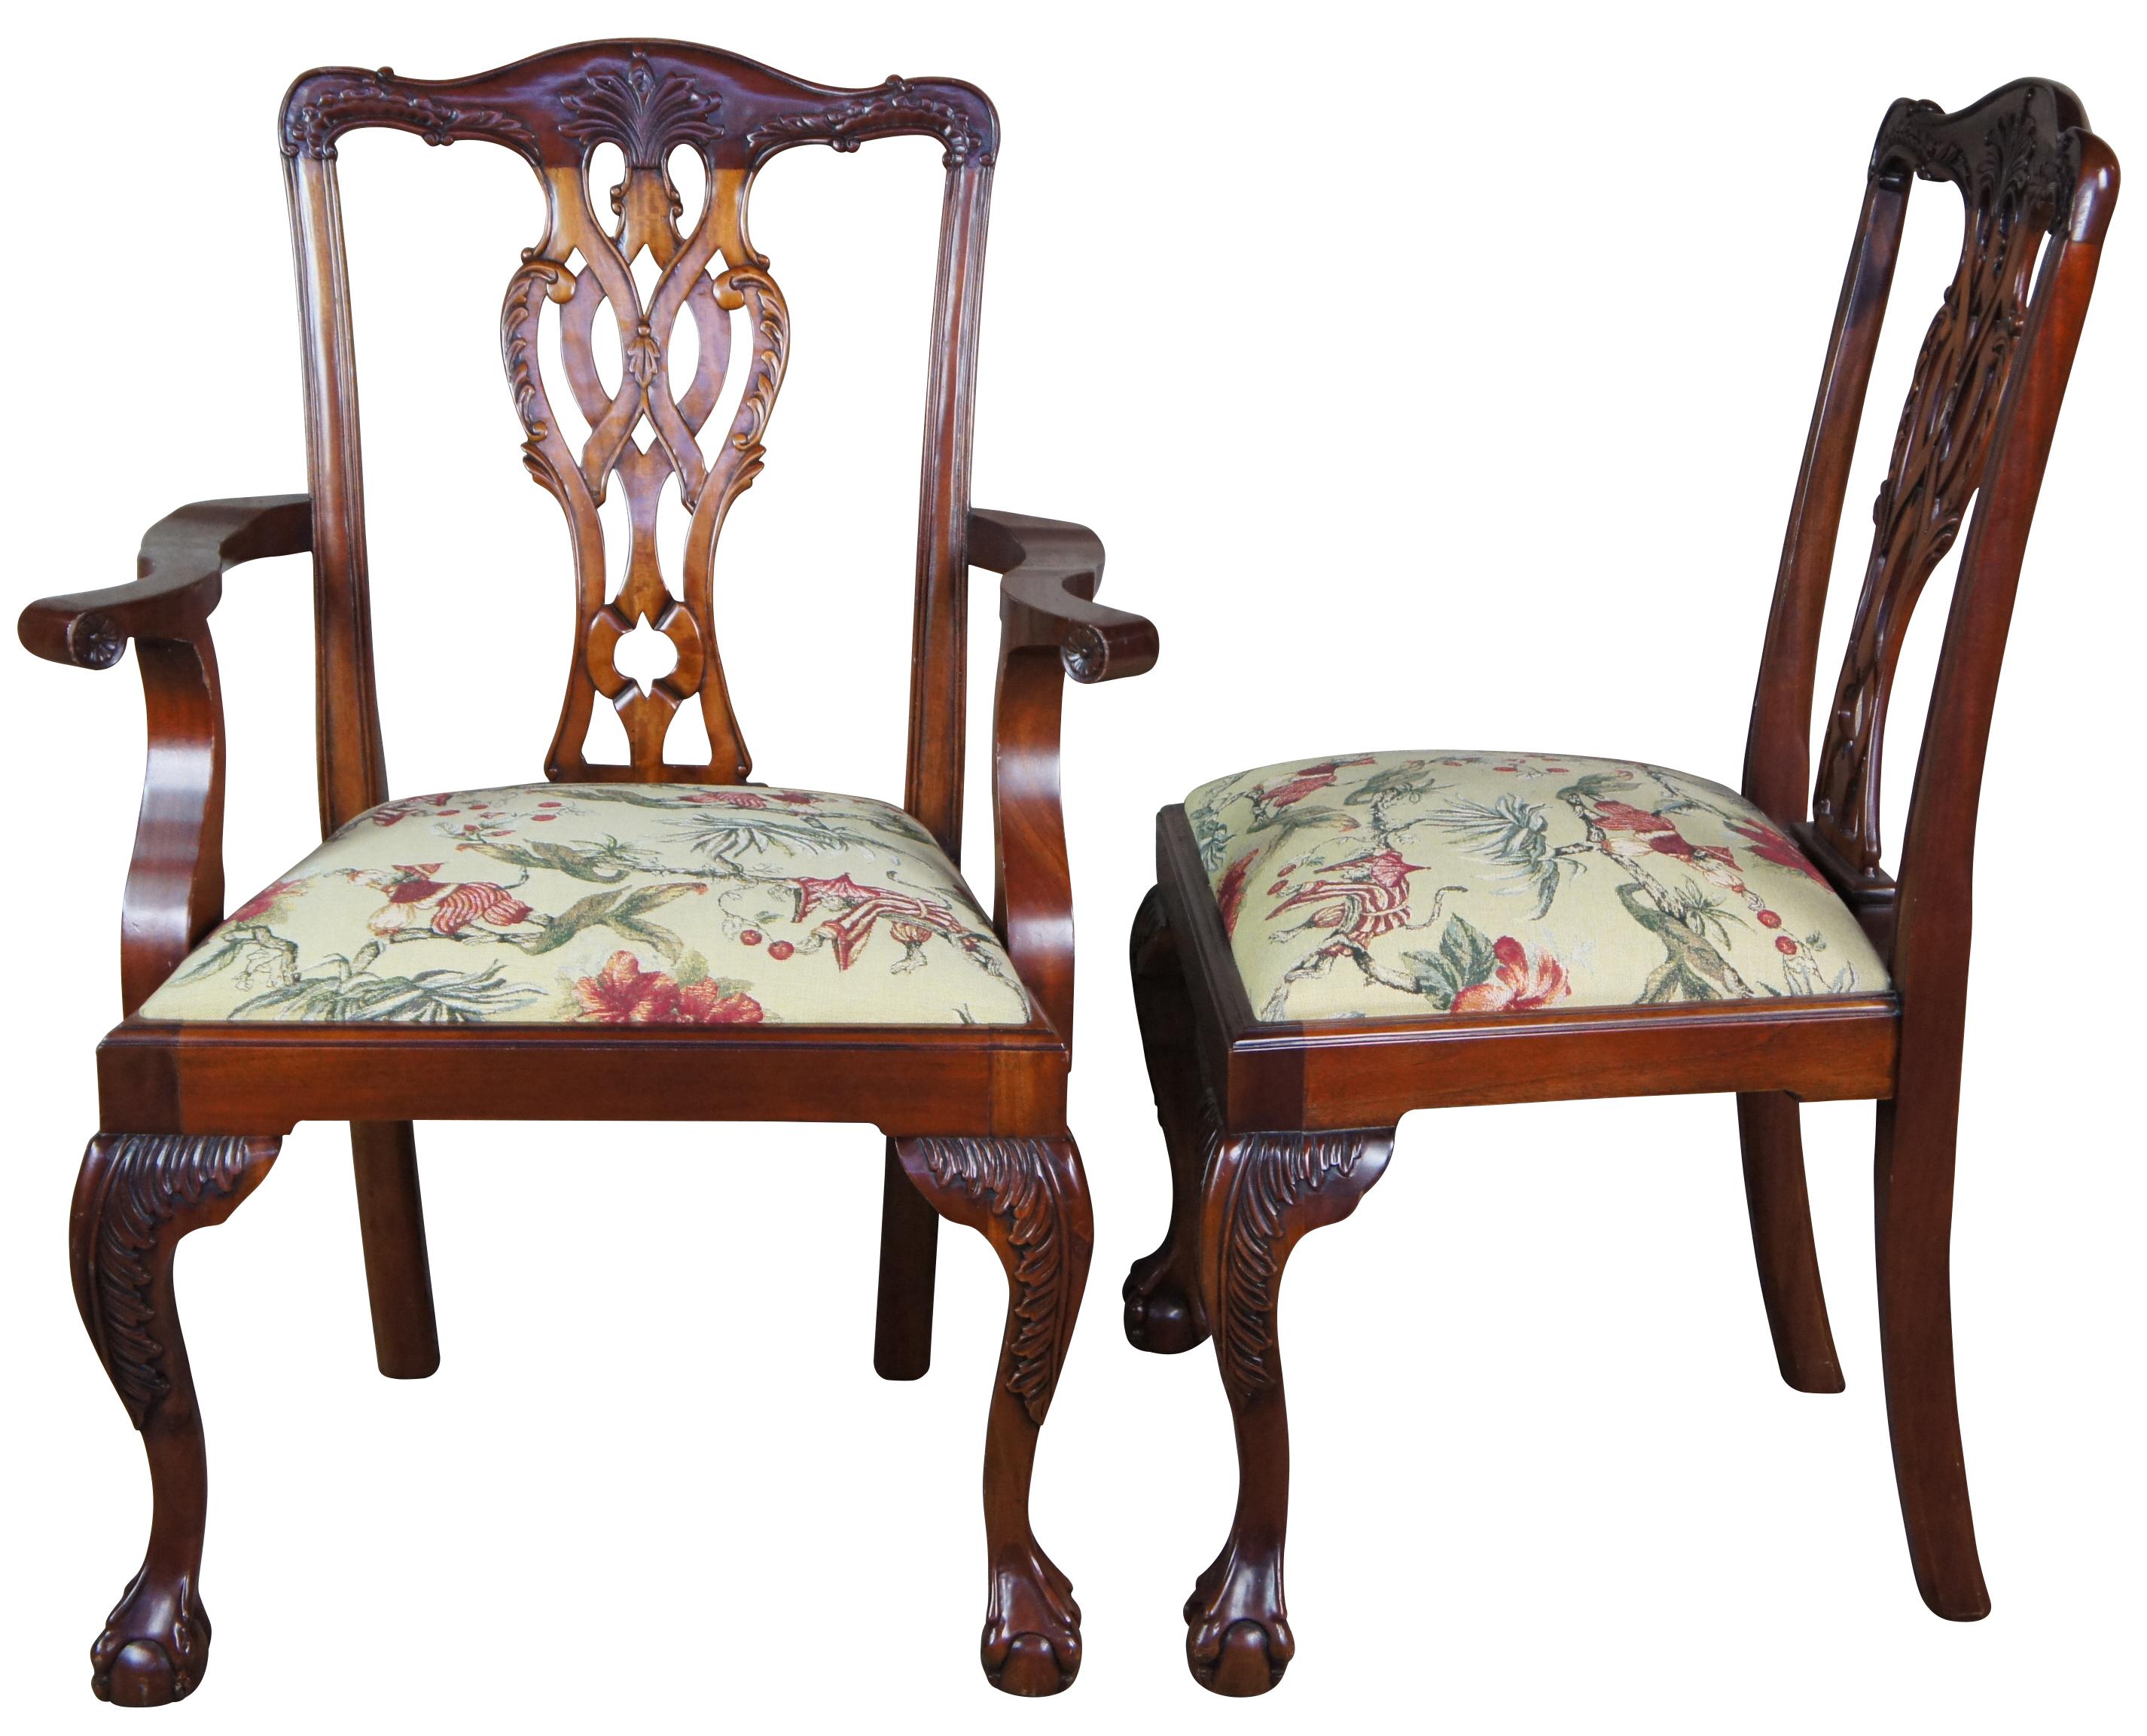 Set of ten Chippendale dining chairs. Made of mahogany featuring serpentine form with a woven pretzel style back, acanthus carvings, and New York ball and claw feet. Upholstered seat featuring tapestry scene with climbing monkeys in asian hats